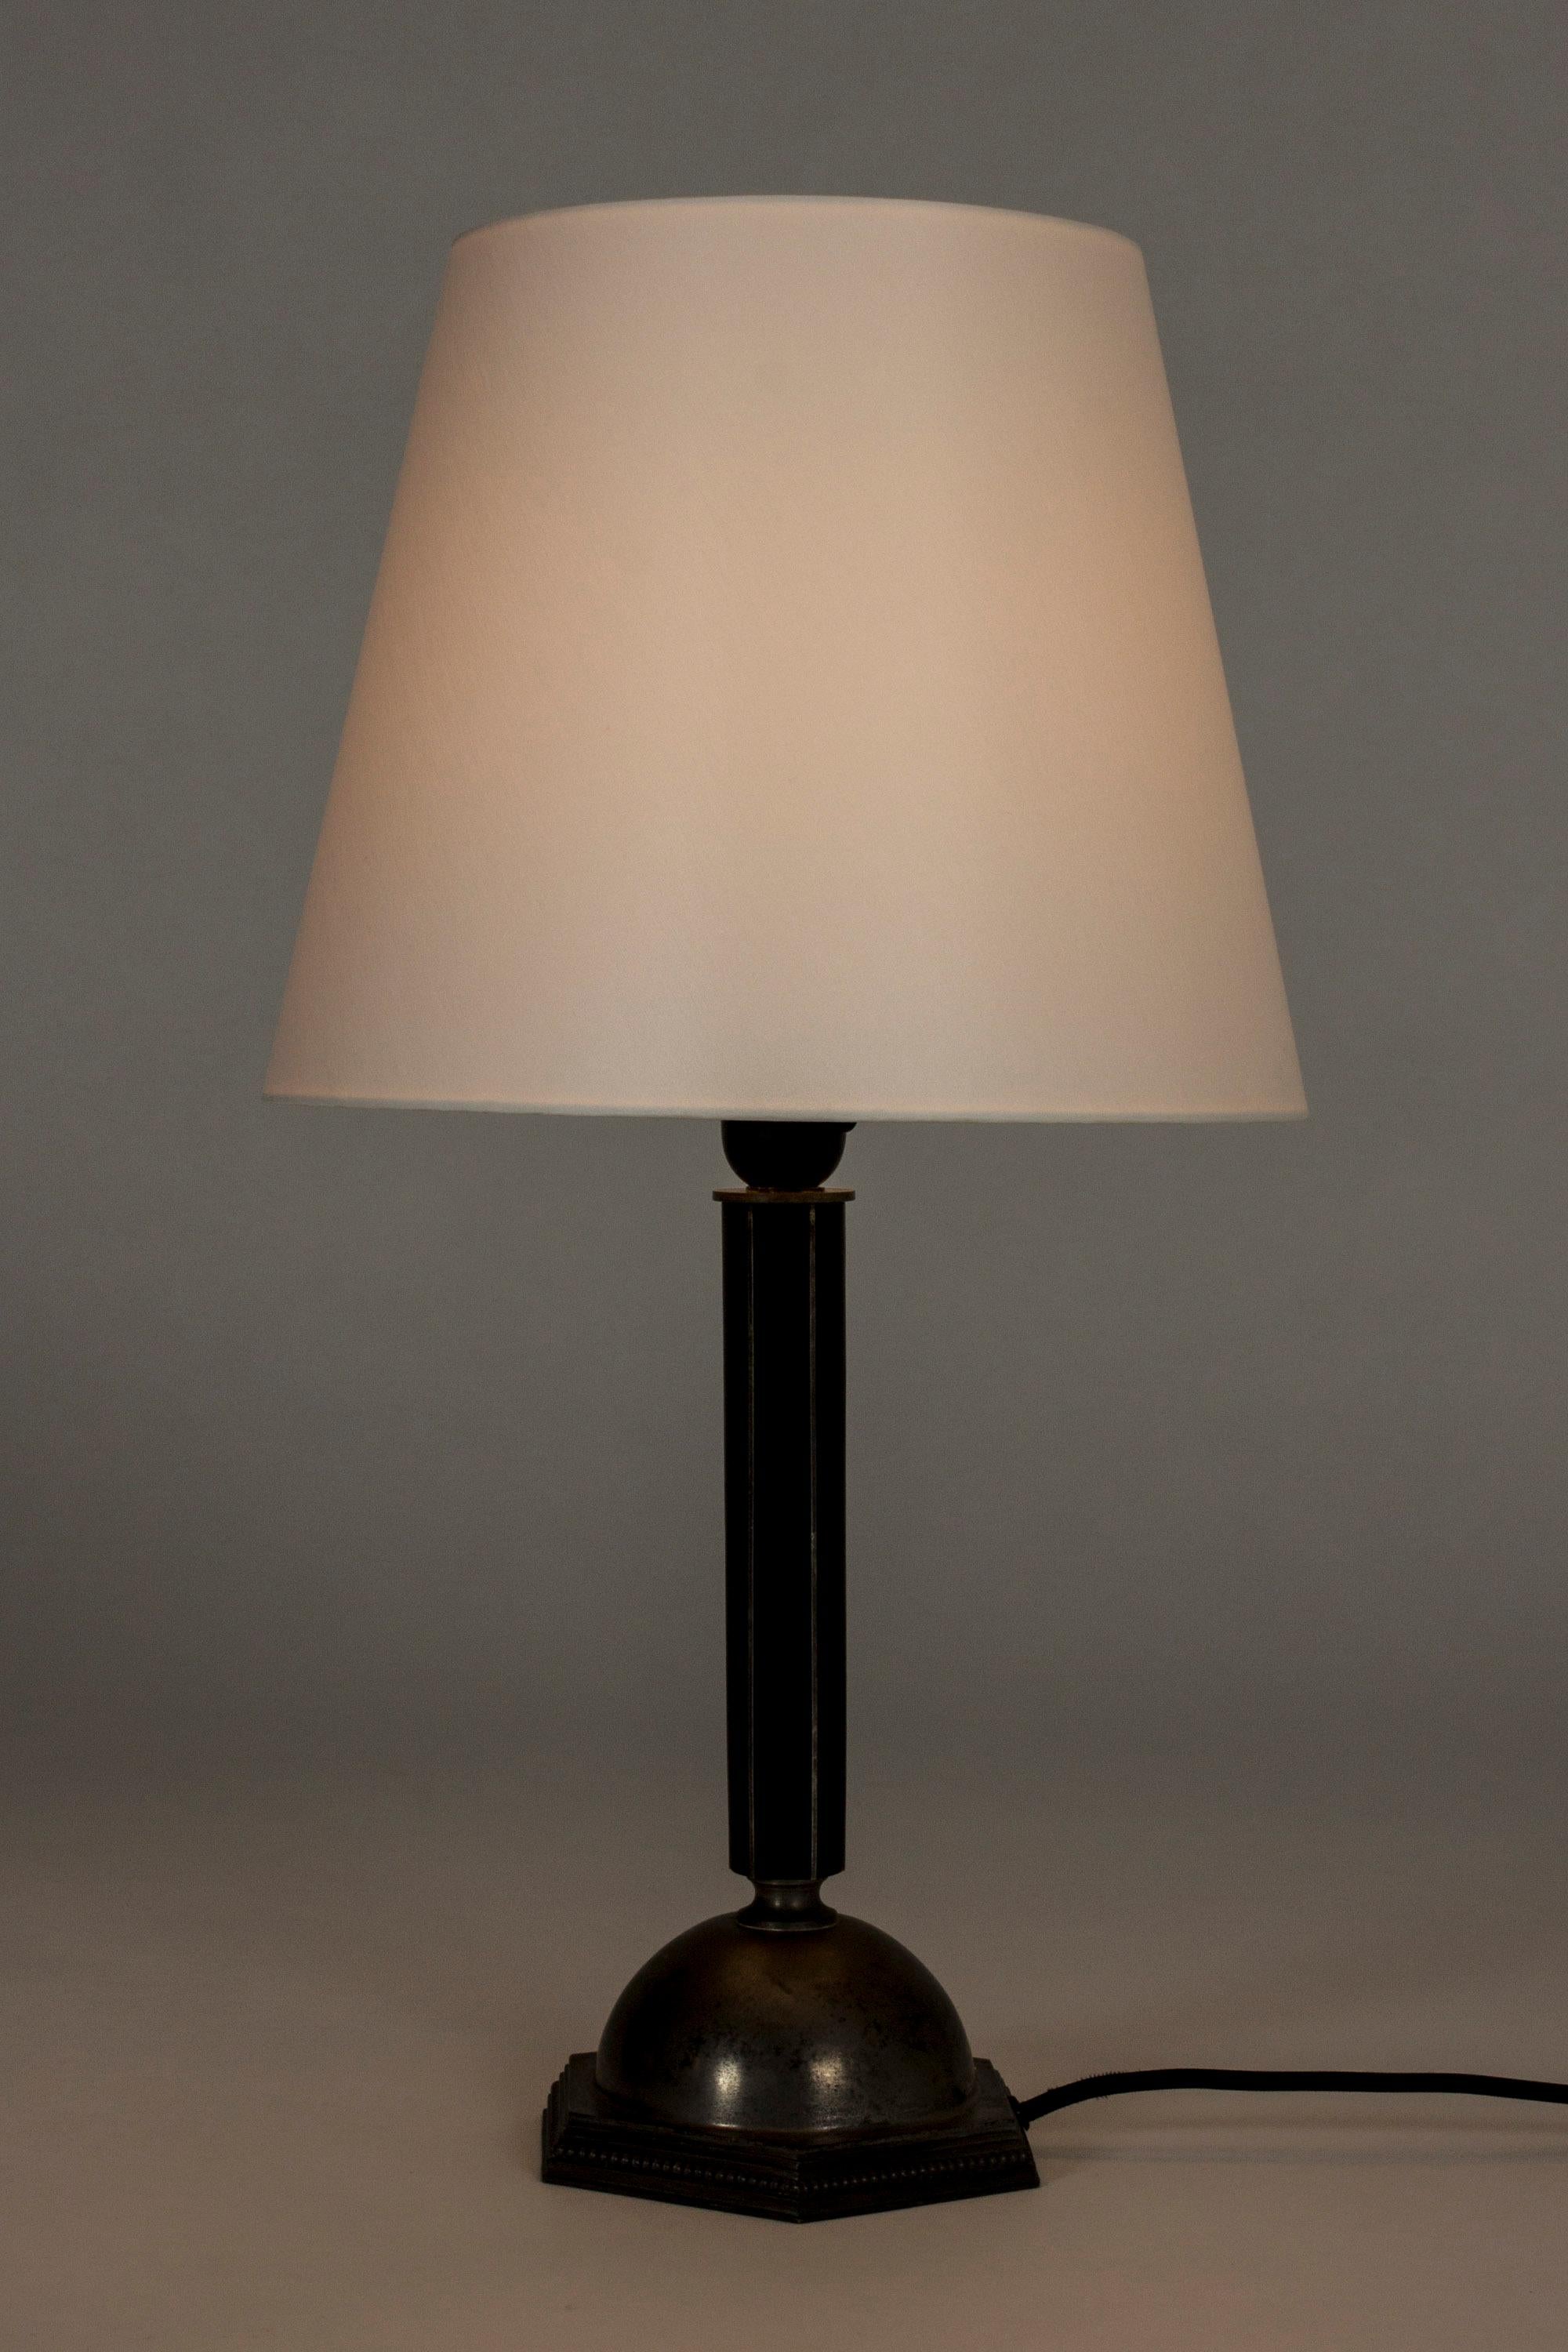 Scandinavian Modern Pewter and Ebony Table Lamp from C. G. Hallberg For Sale